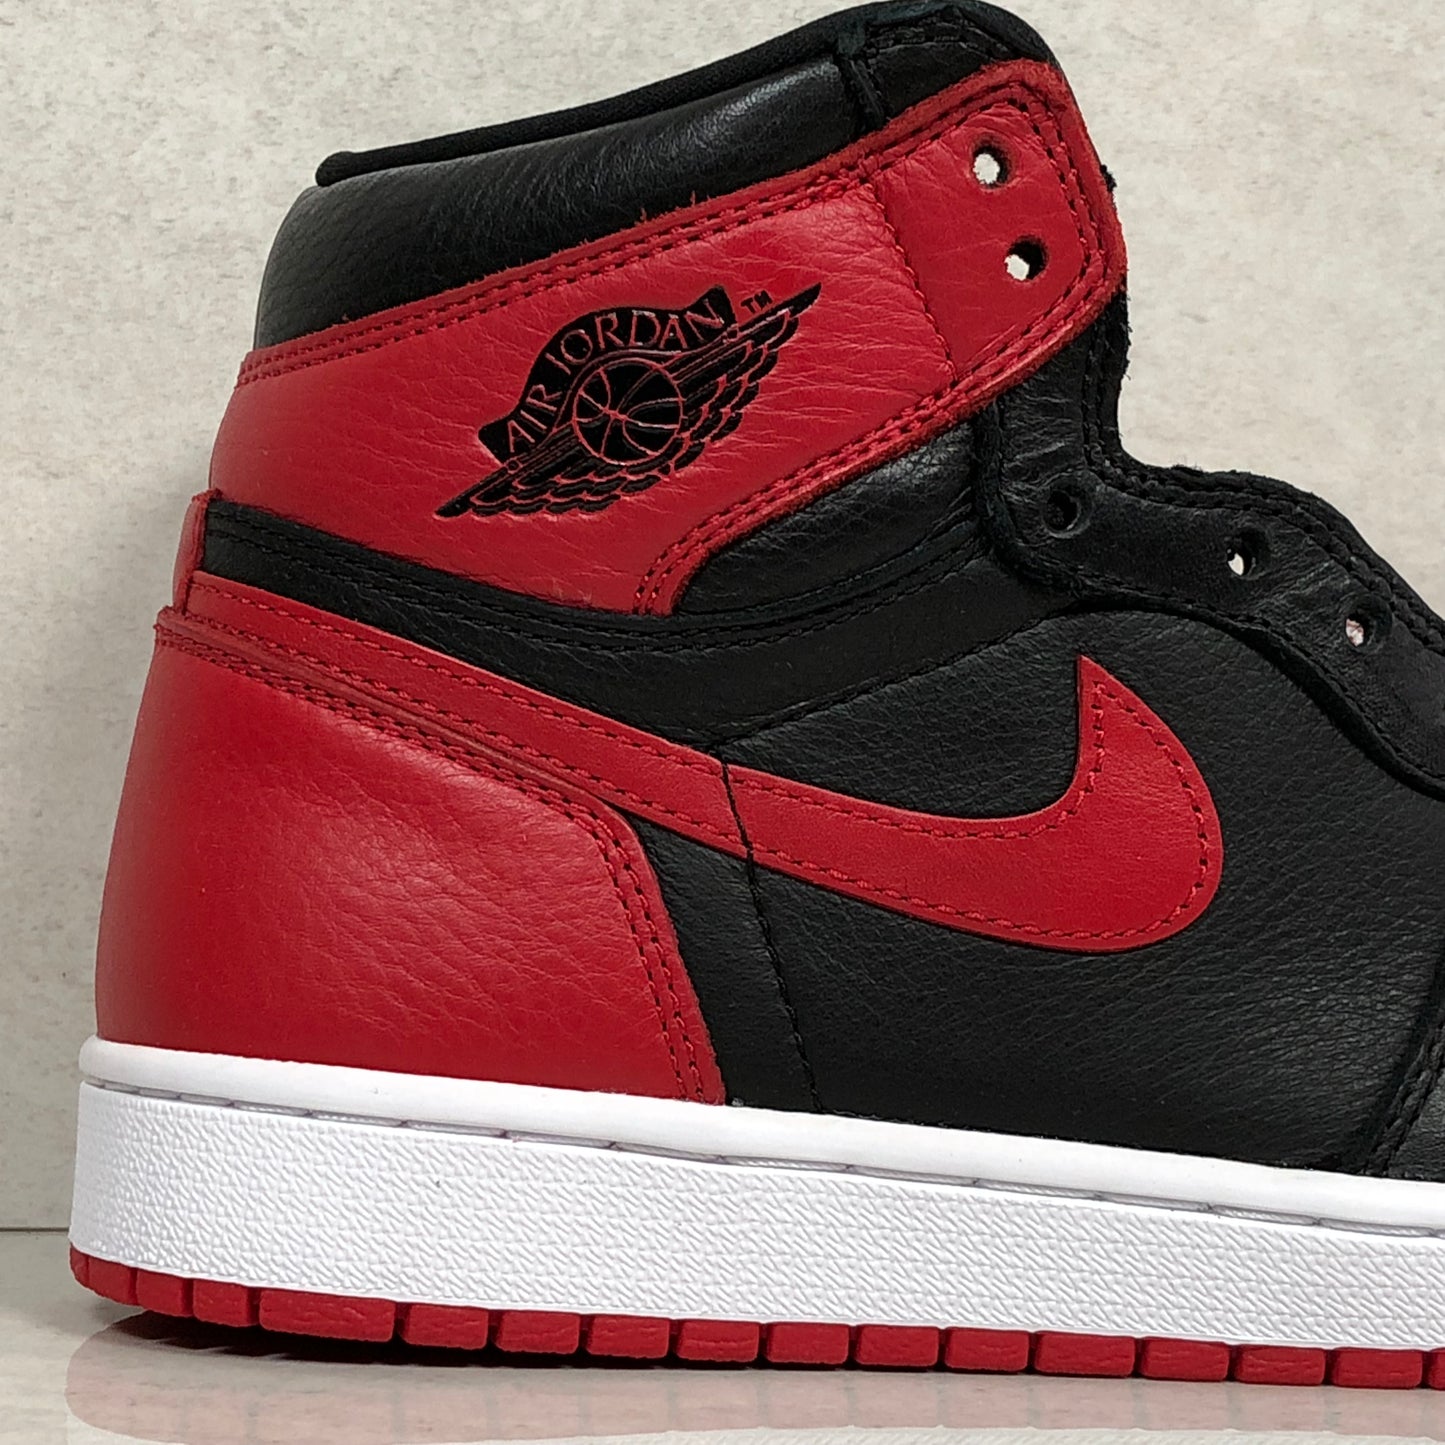 Nike Air Jordan 1 I Retro High OG Homage To Home 861428 061 Homme Taille 11,11.5/Taille 12